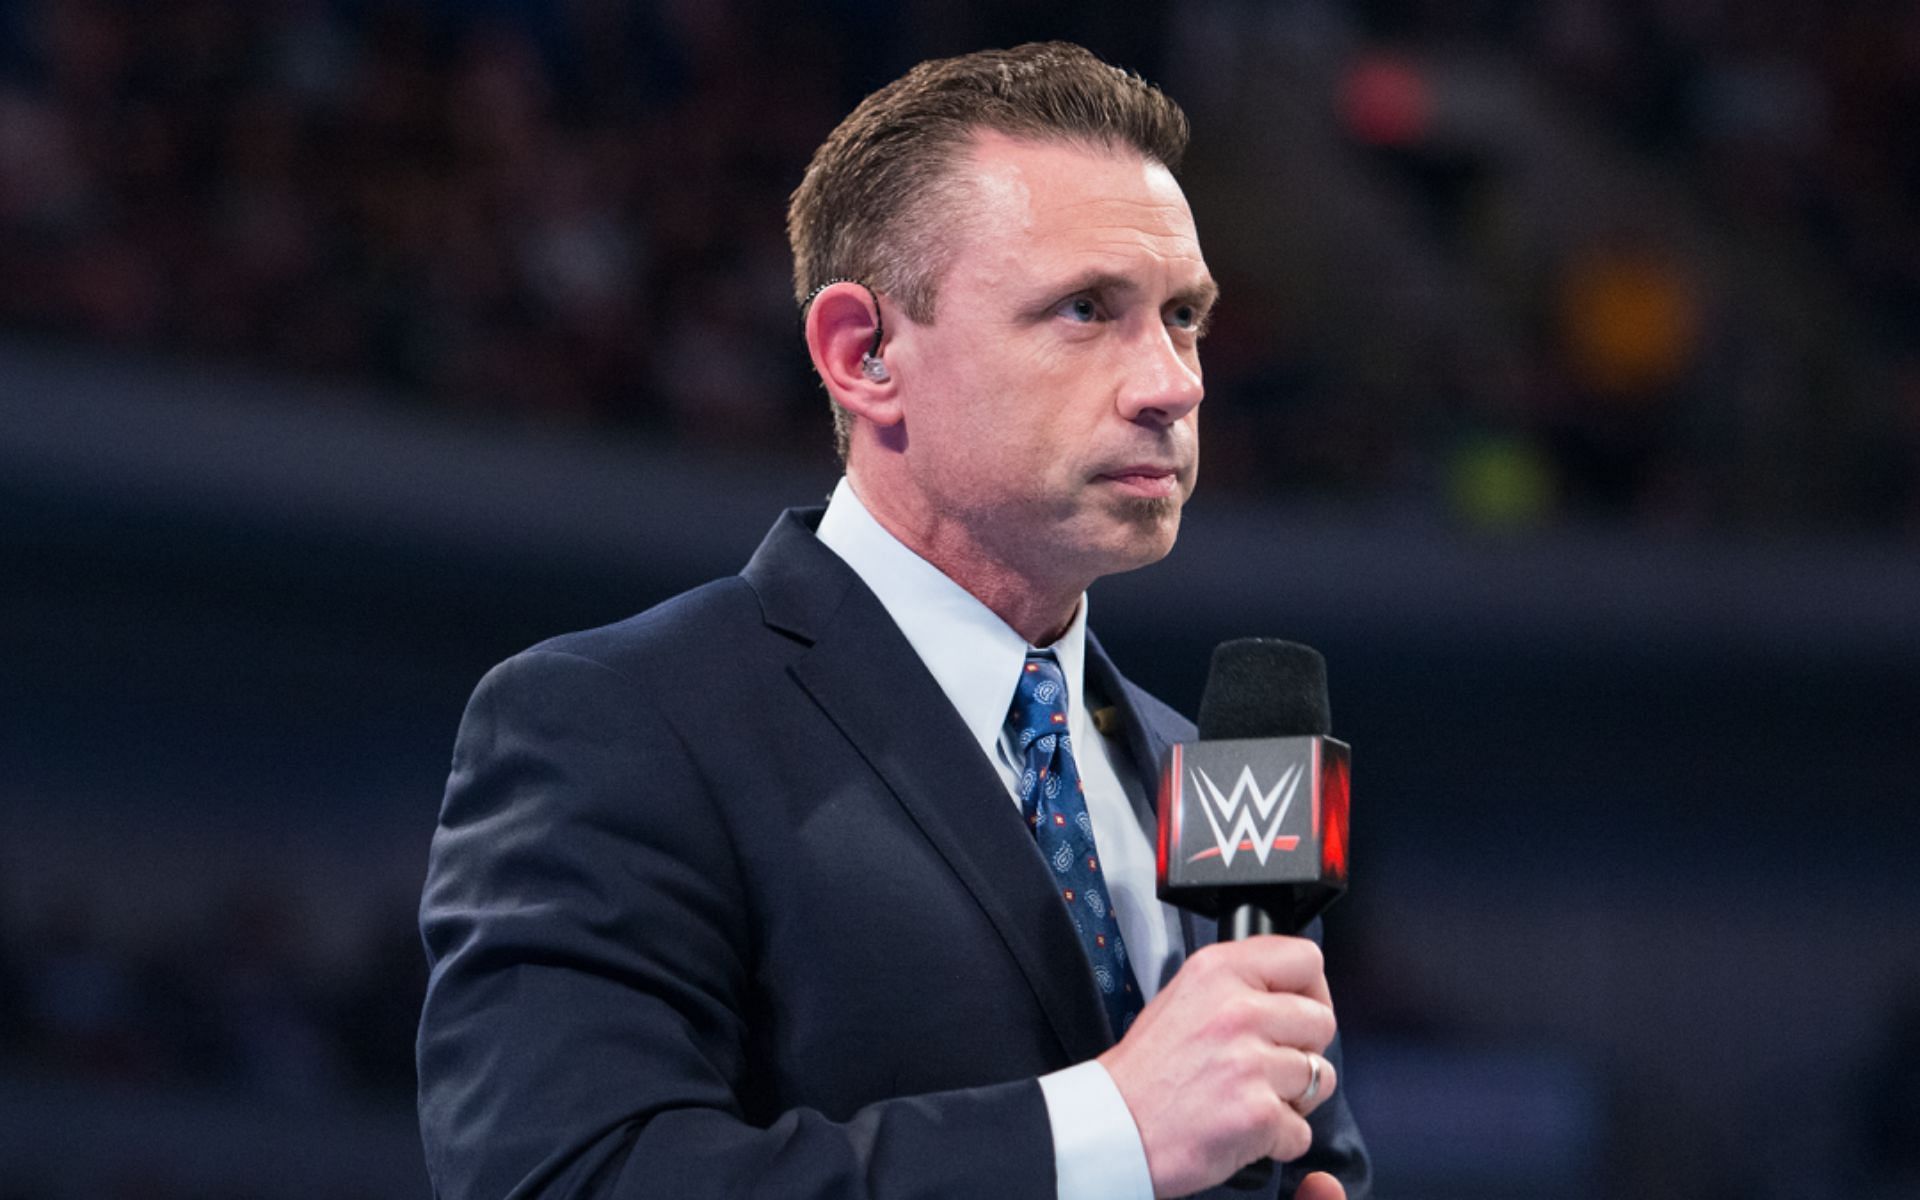 WWE Commentator Michael Cole has been with the company for almost 25 years.